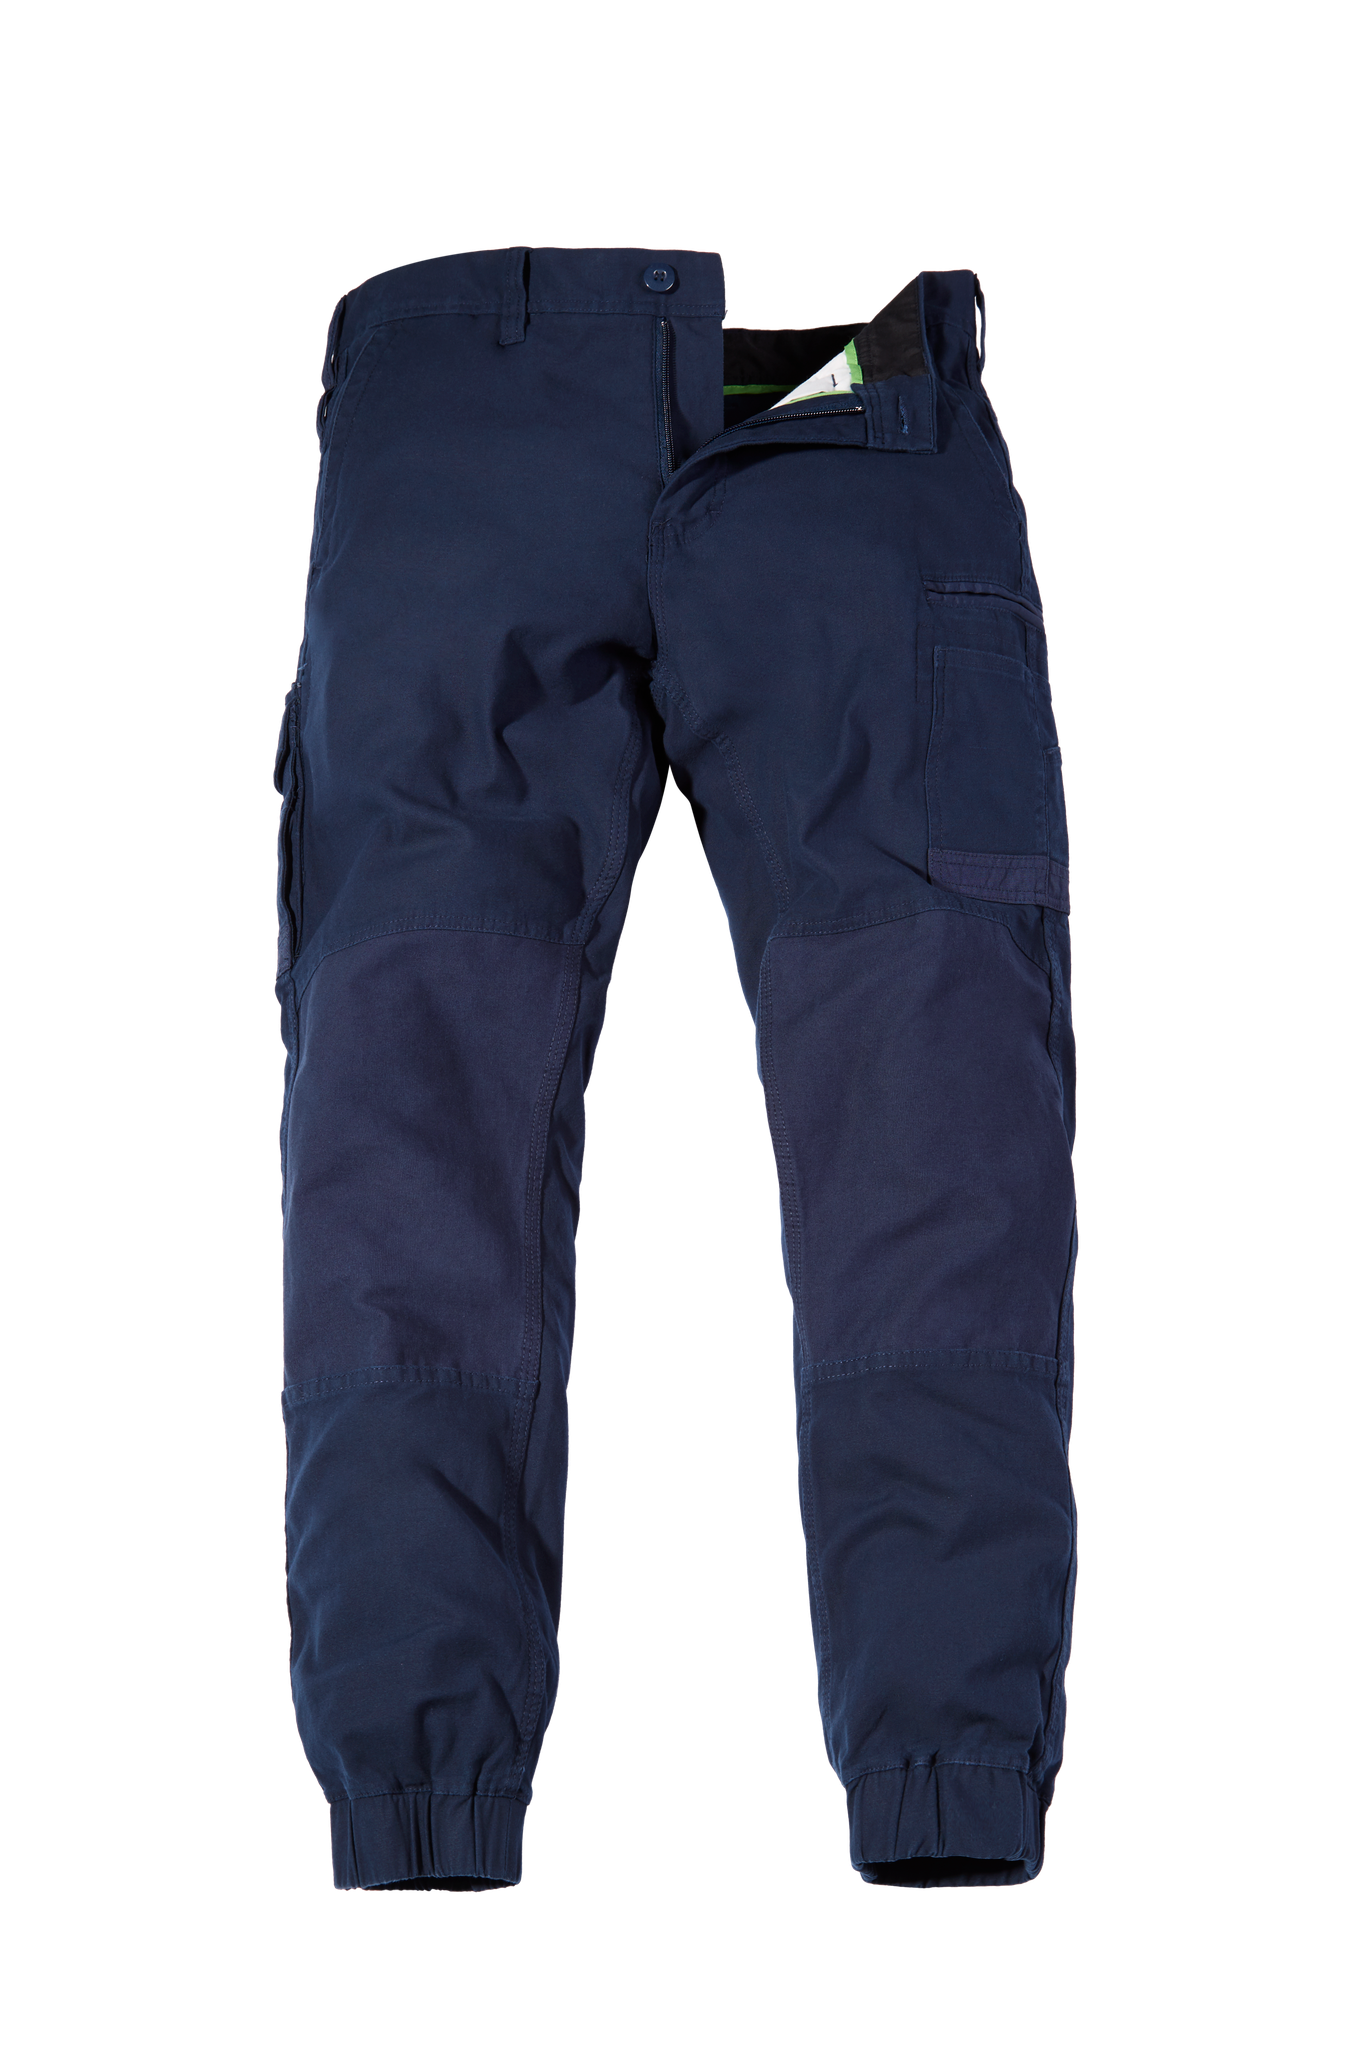 FXD WP-4 Pant